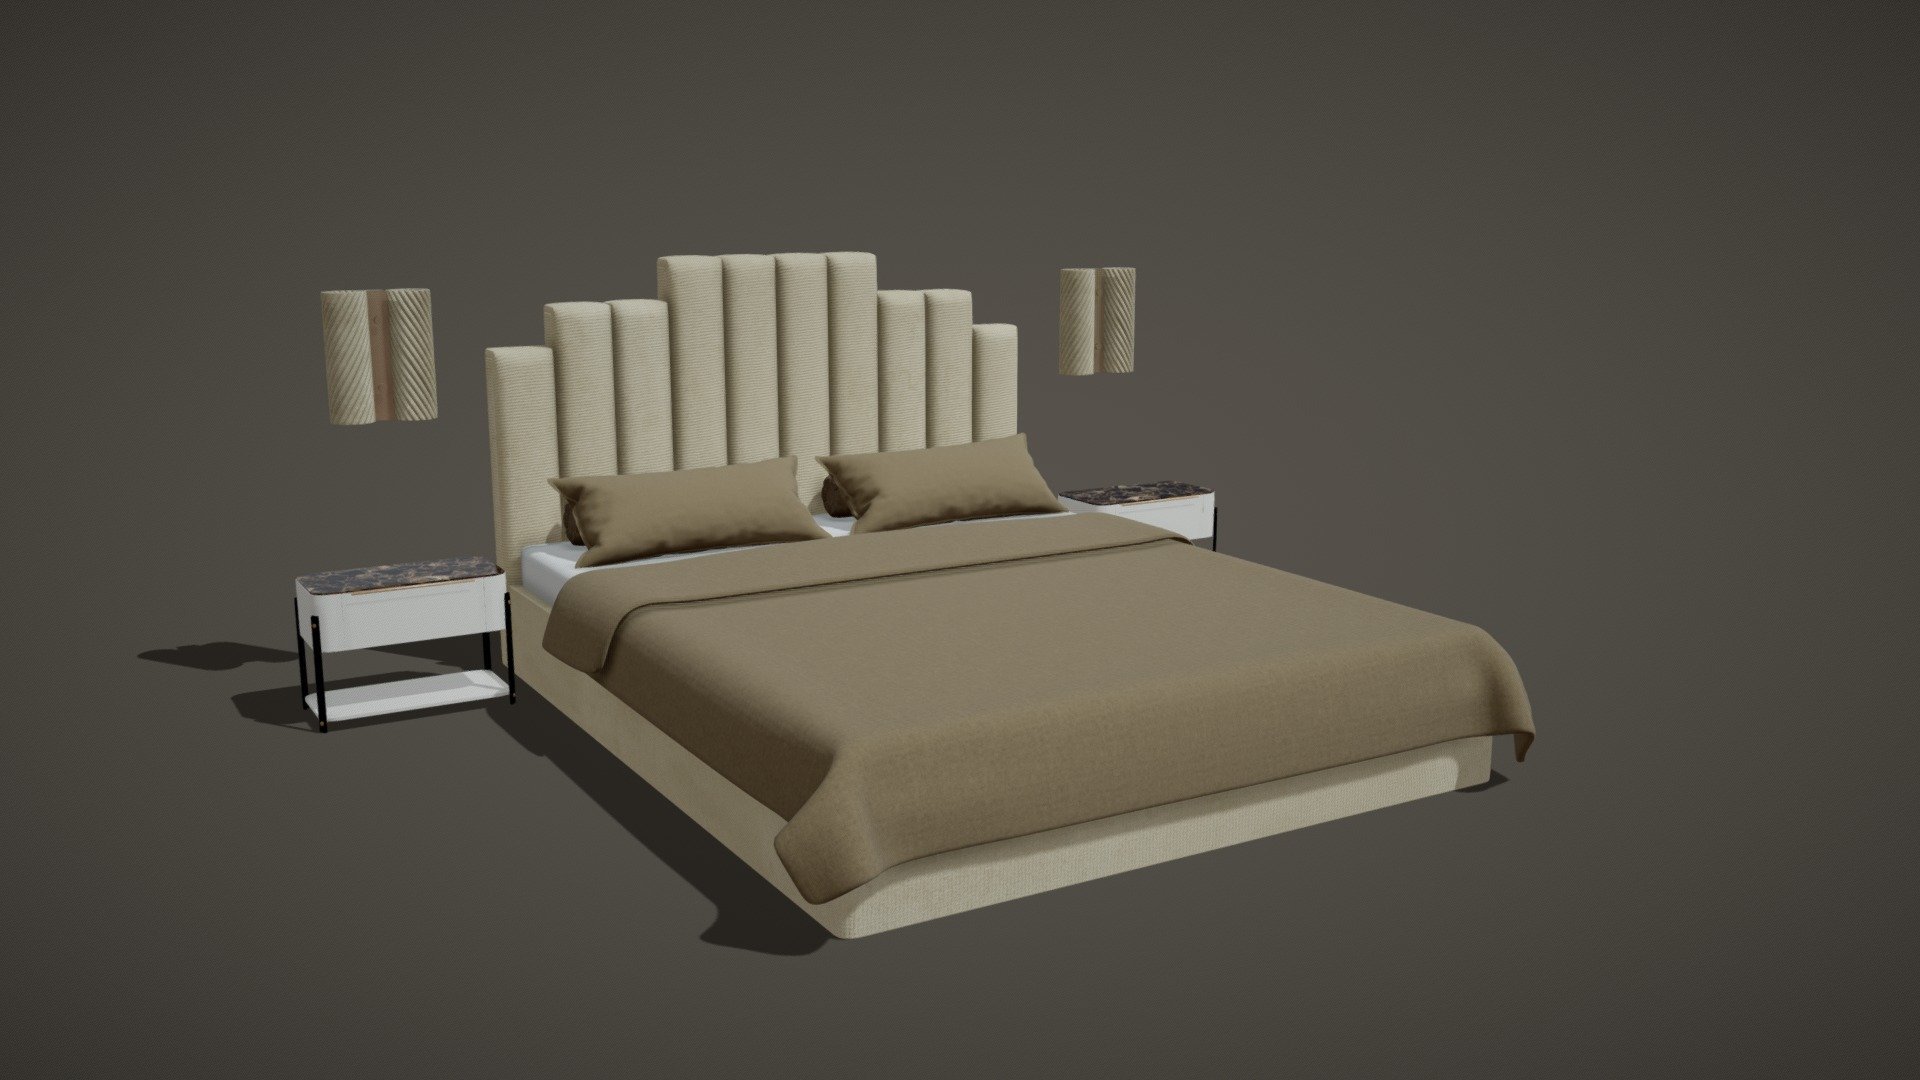 Thats a bed set 03

Model is made for Modern Design Interior

Great for any interior project or AR Project.

model has 2 material set 4k textures 3d model